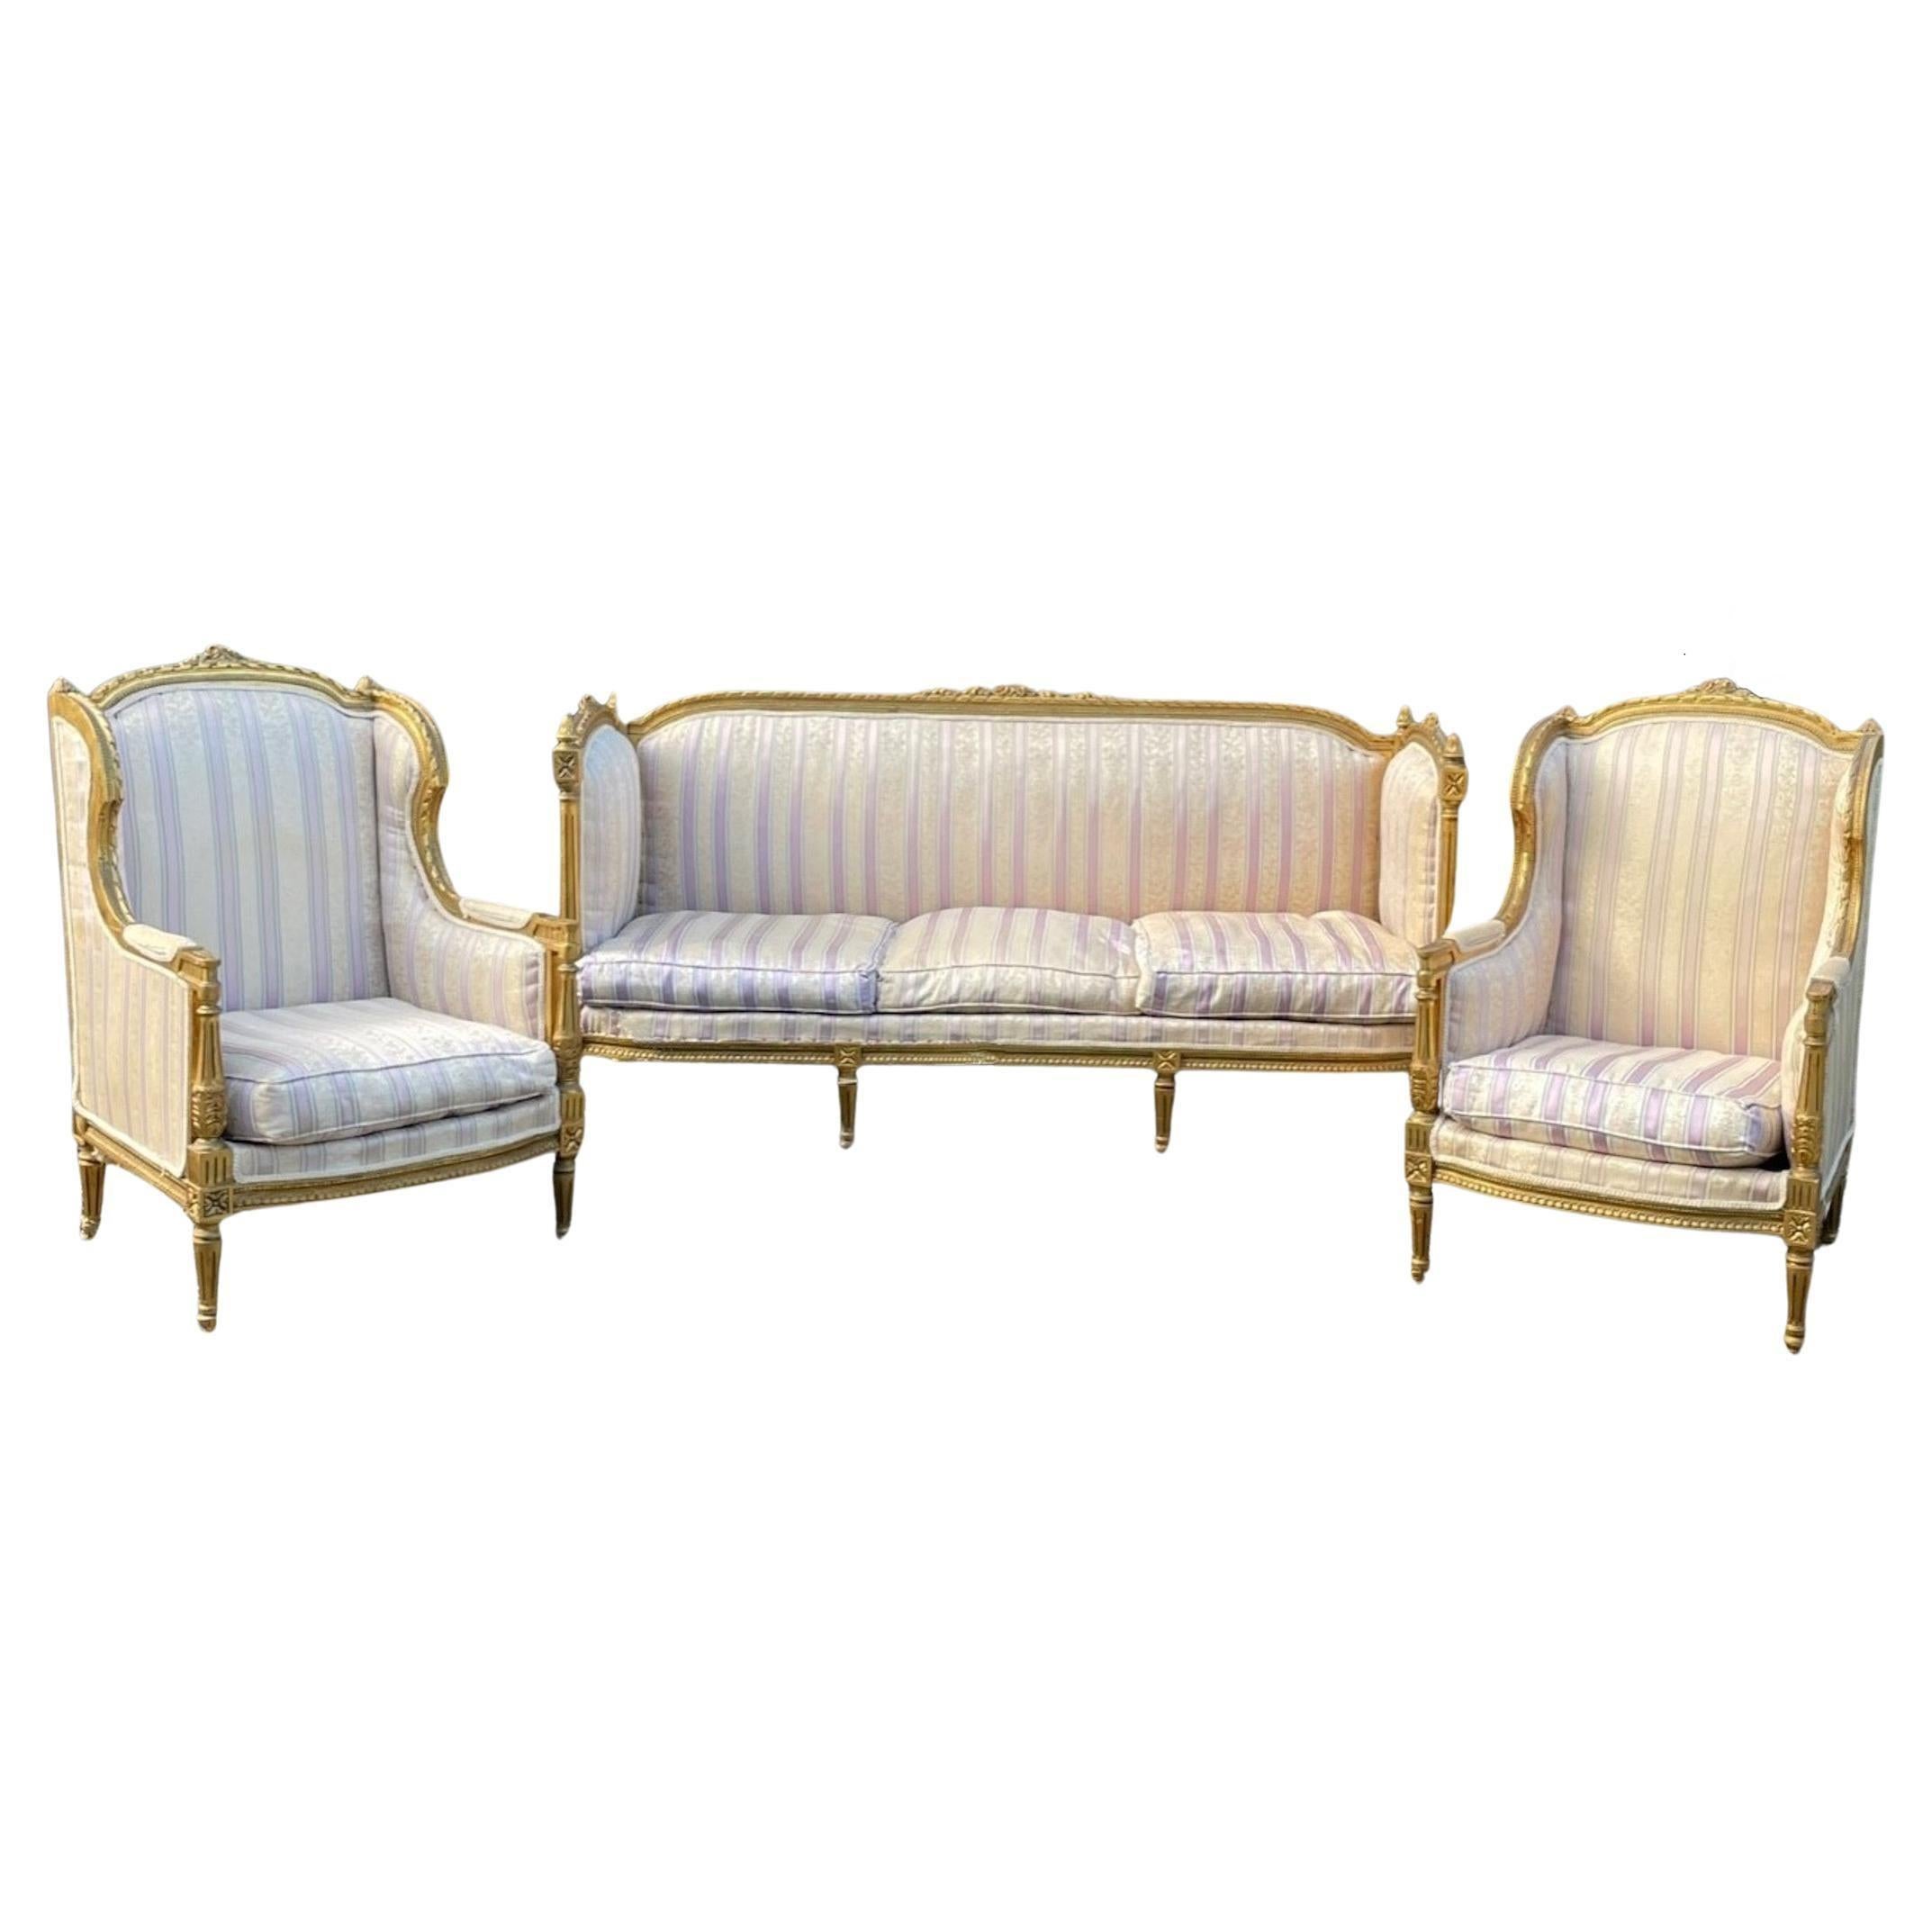 French 19th Century Louis XVI Style Settee and Bergeres A Oreilles In Good Condition For Sale In Vero Beach, FL